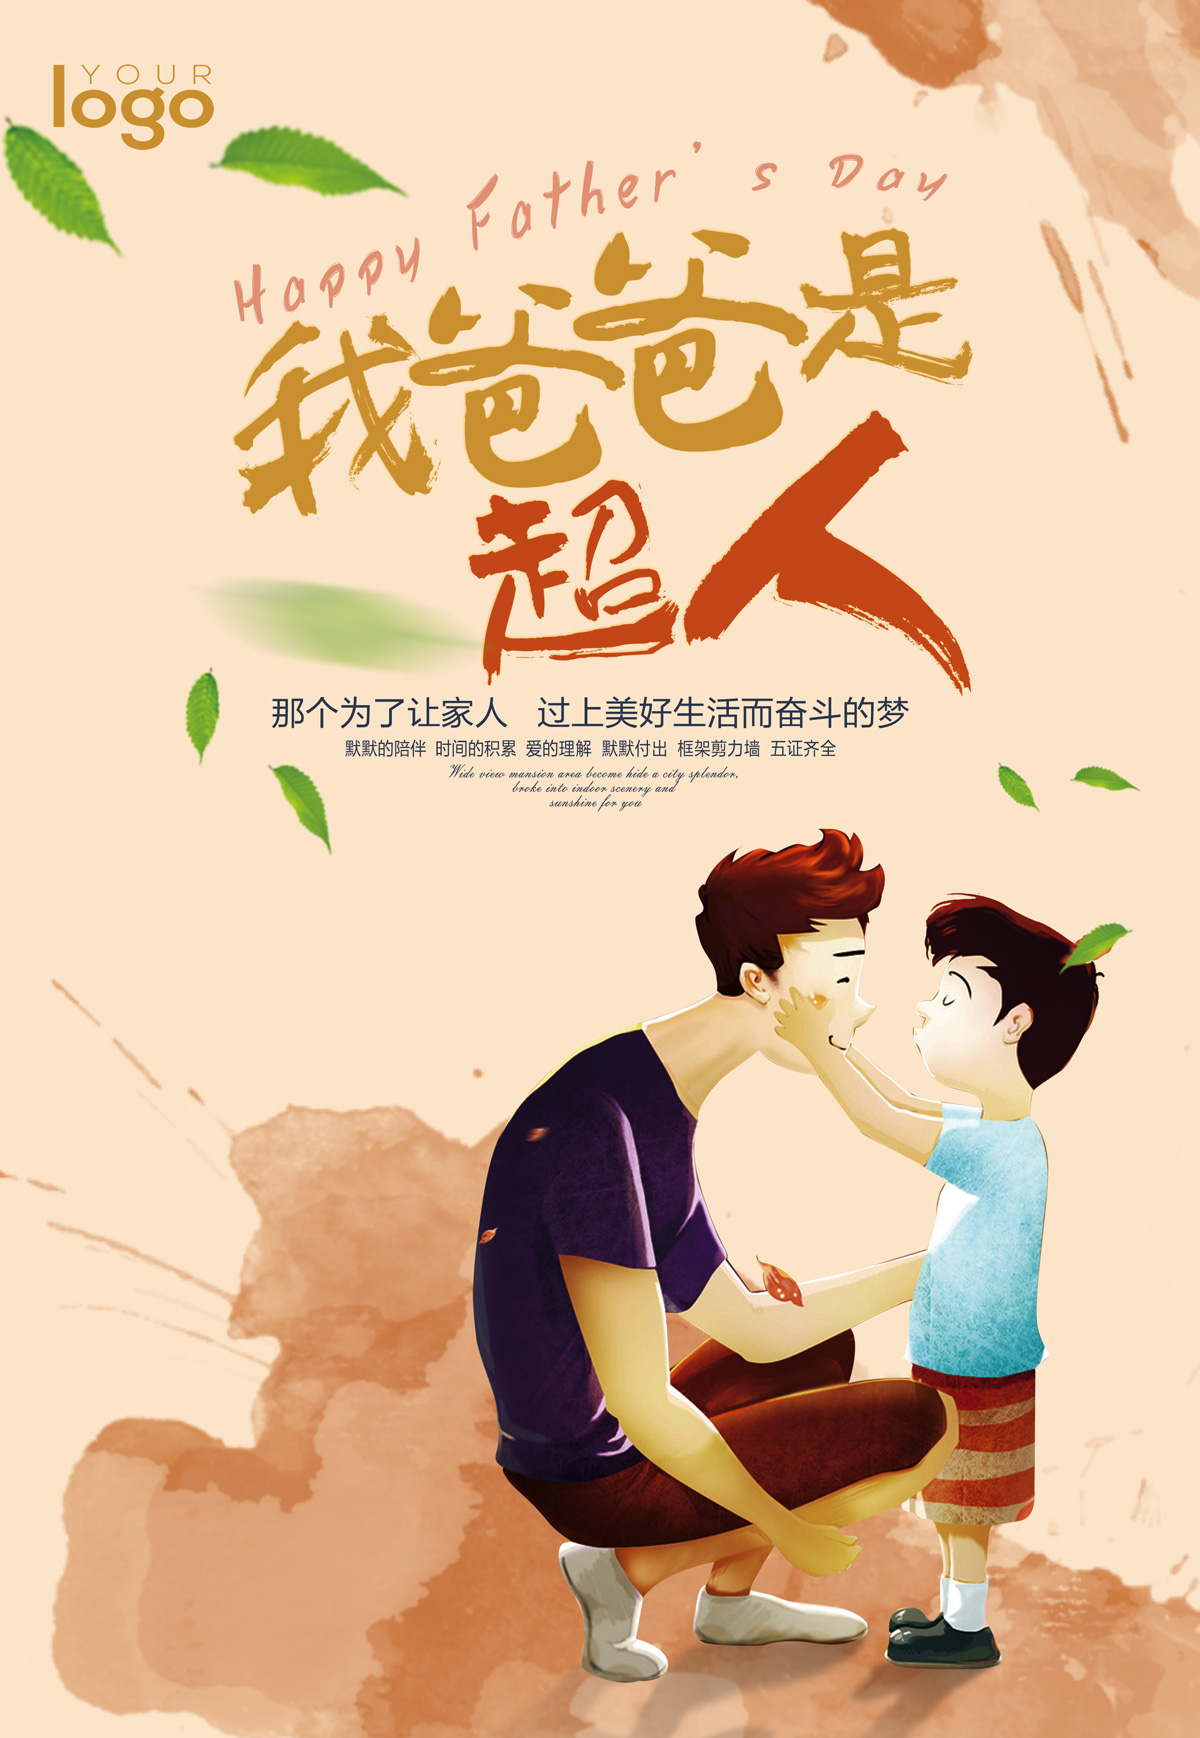 Happy Father's Day China PSD File Free Download